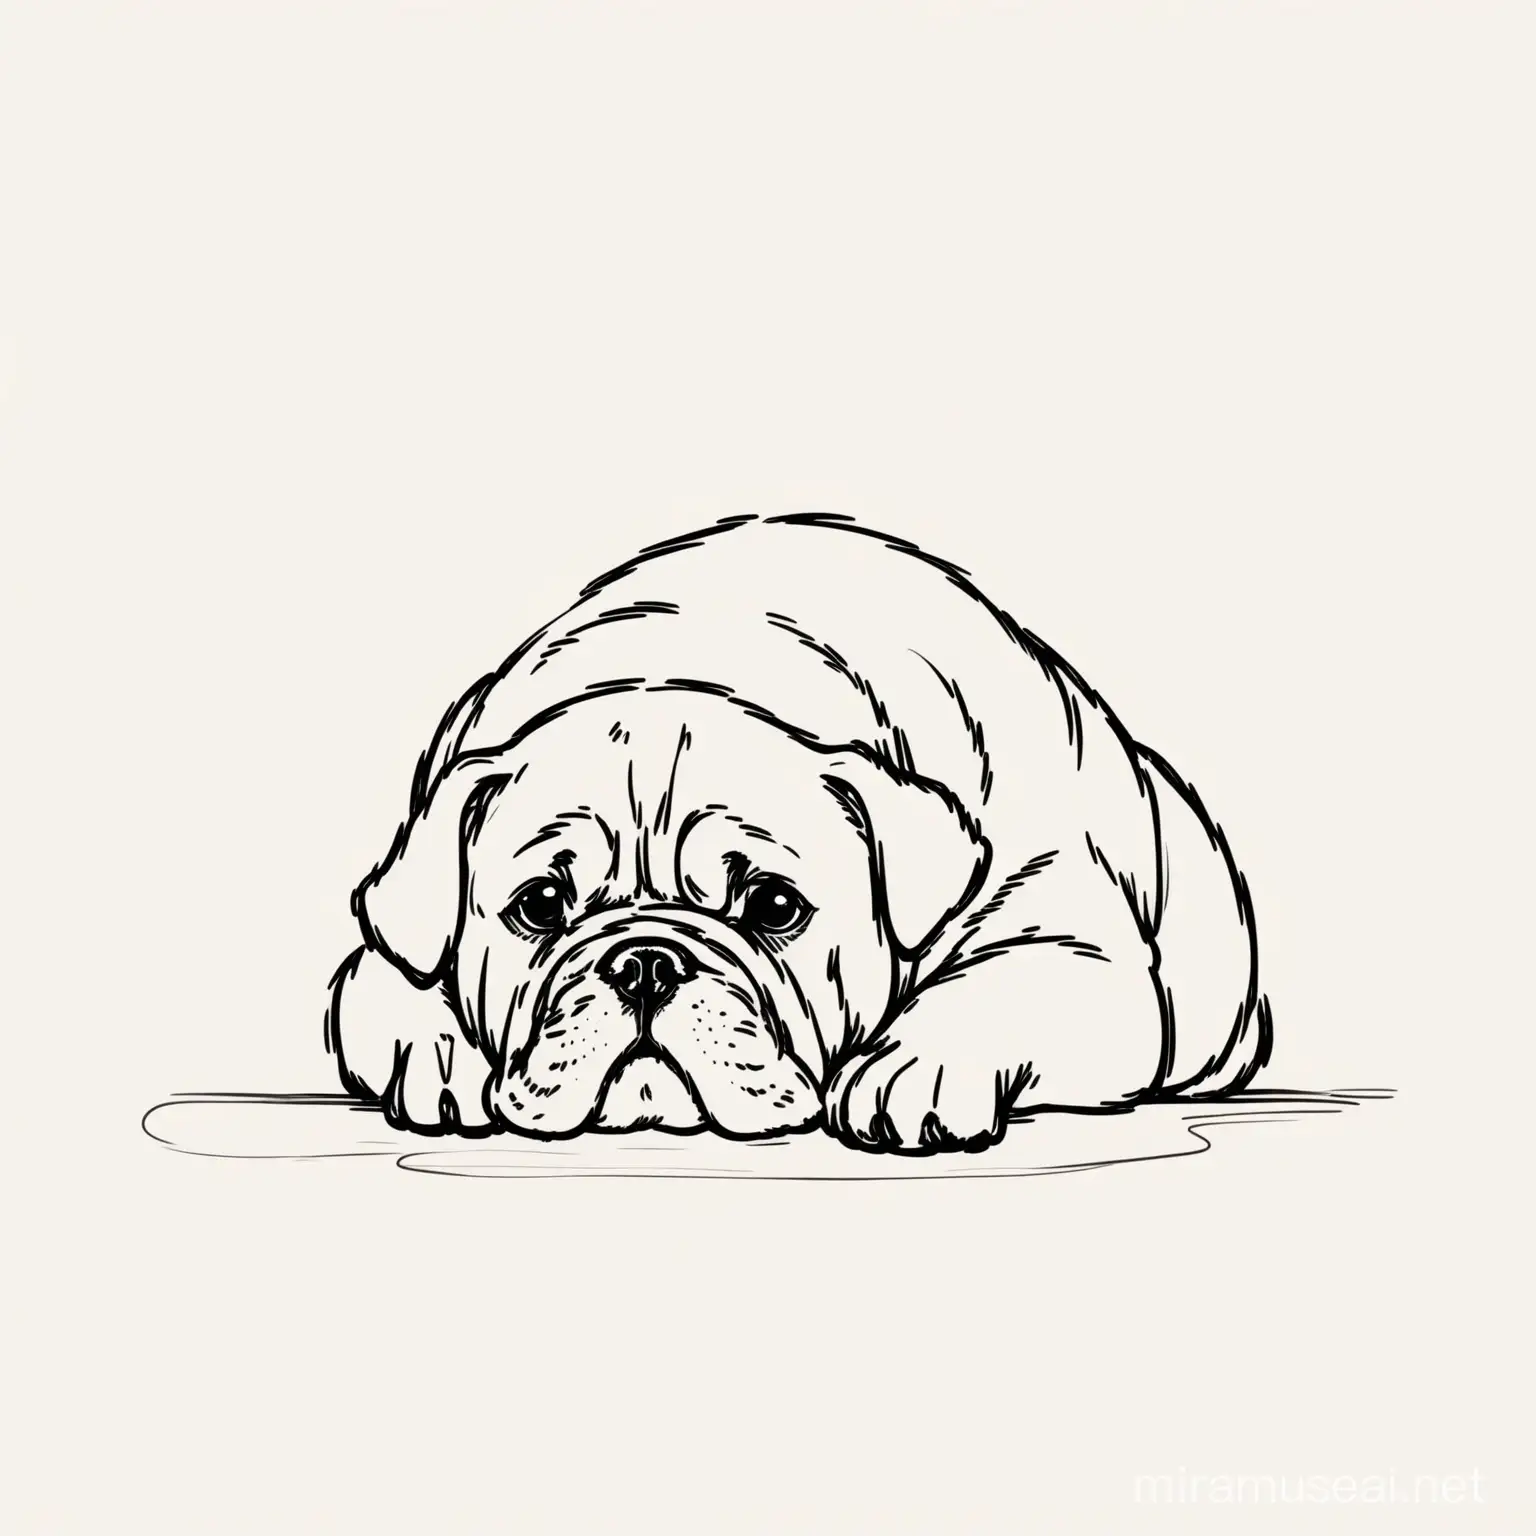 Cute Bulldog in Thought Minimalist Abstract Single Line Art